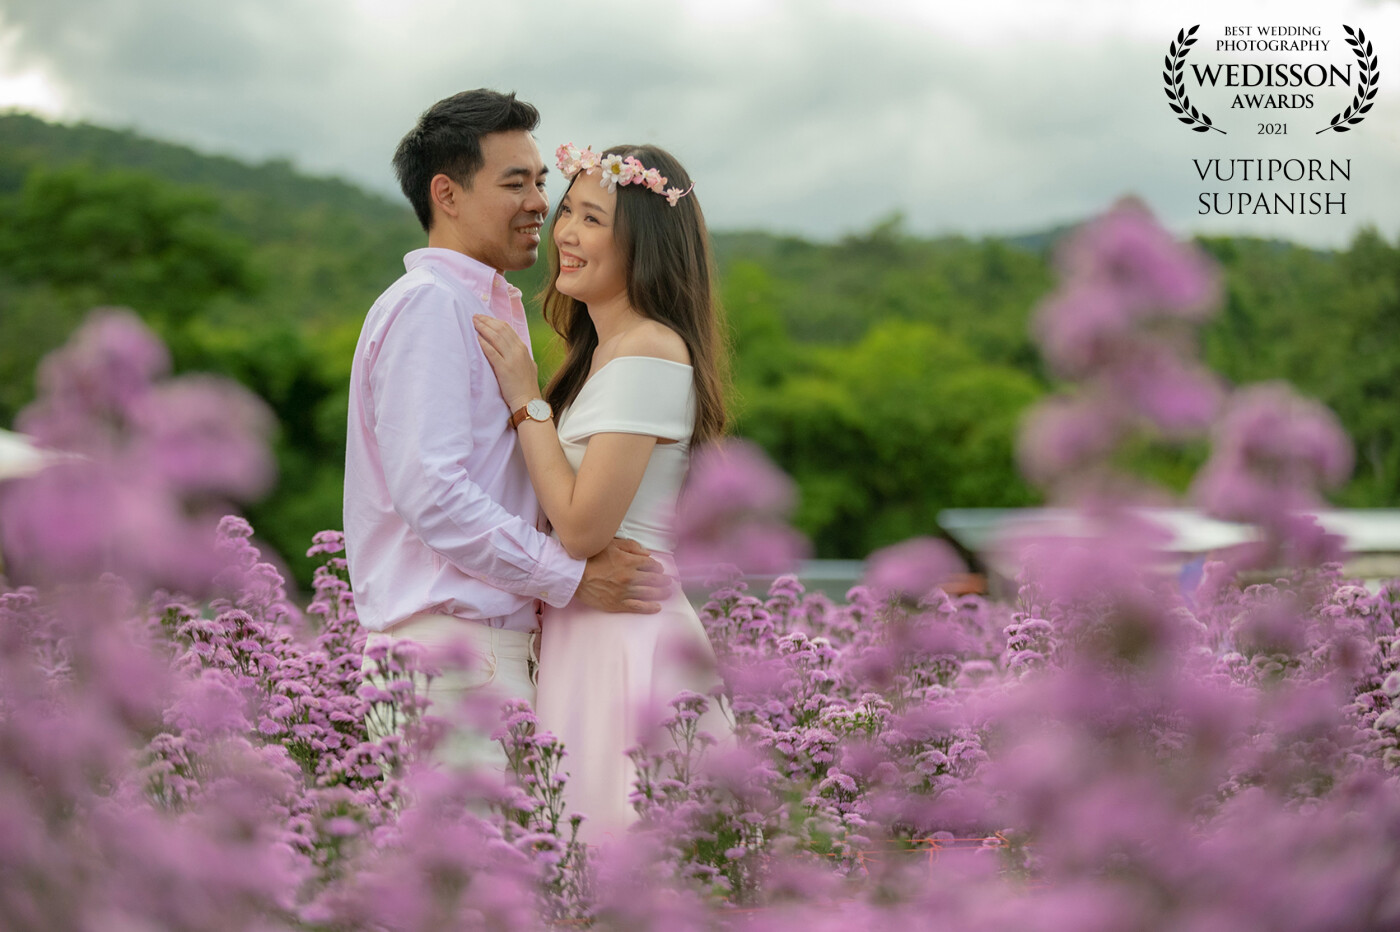 This photo was taken on a field of purple Margaret flowers that begin to bloom. The scene in front of purple corresponds to the mood of the bride and groom smiling happily. I like this picture too.